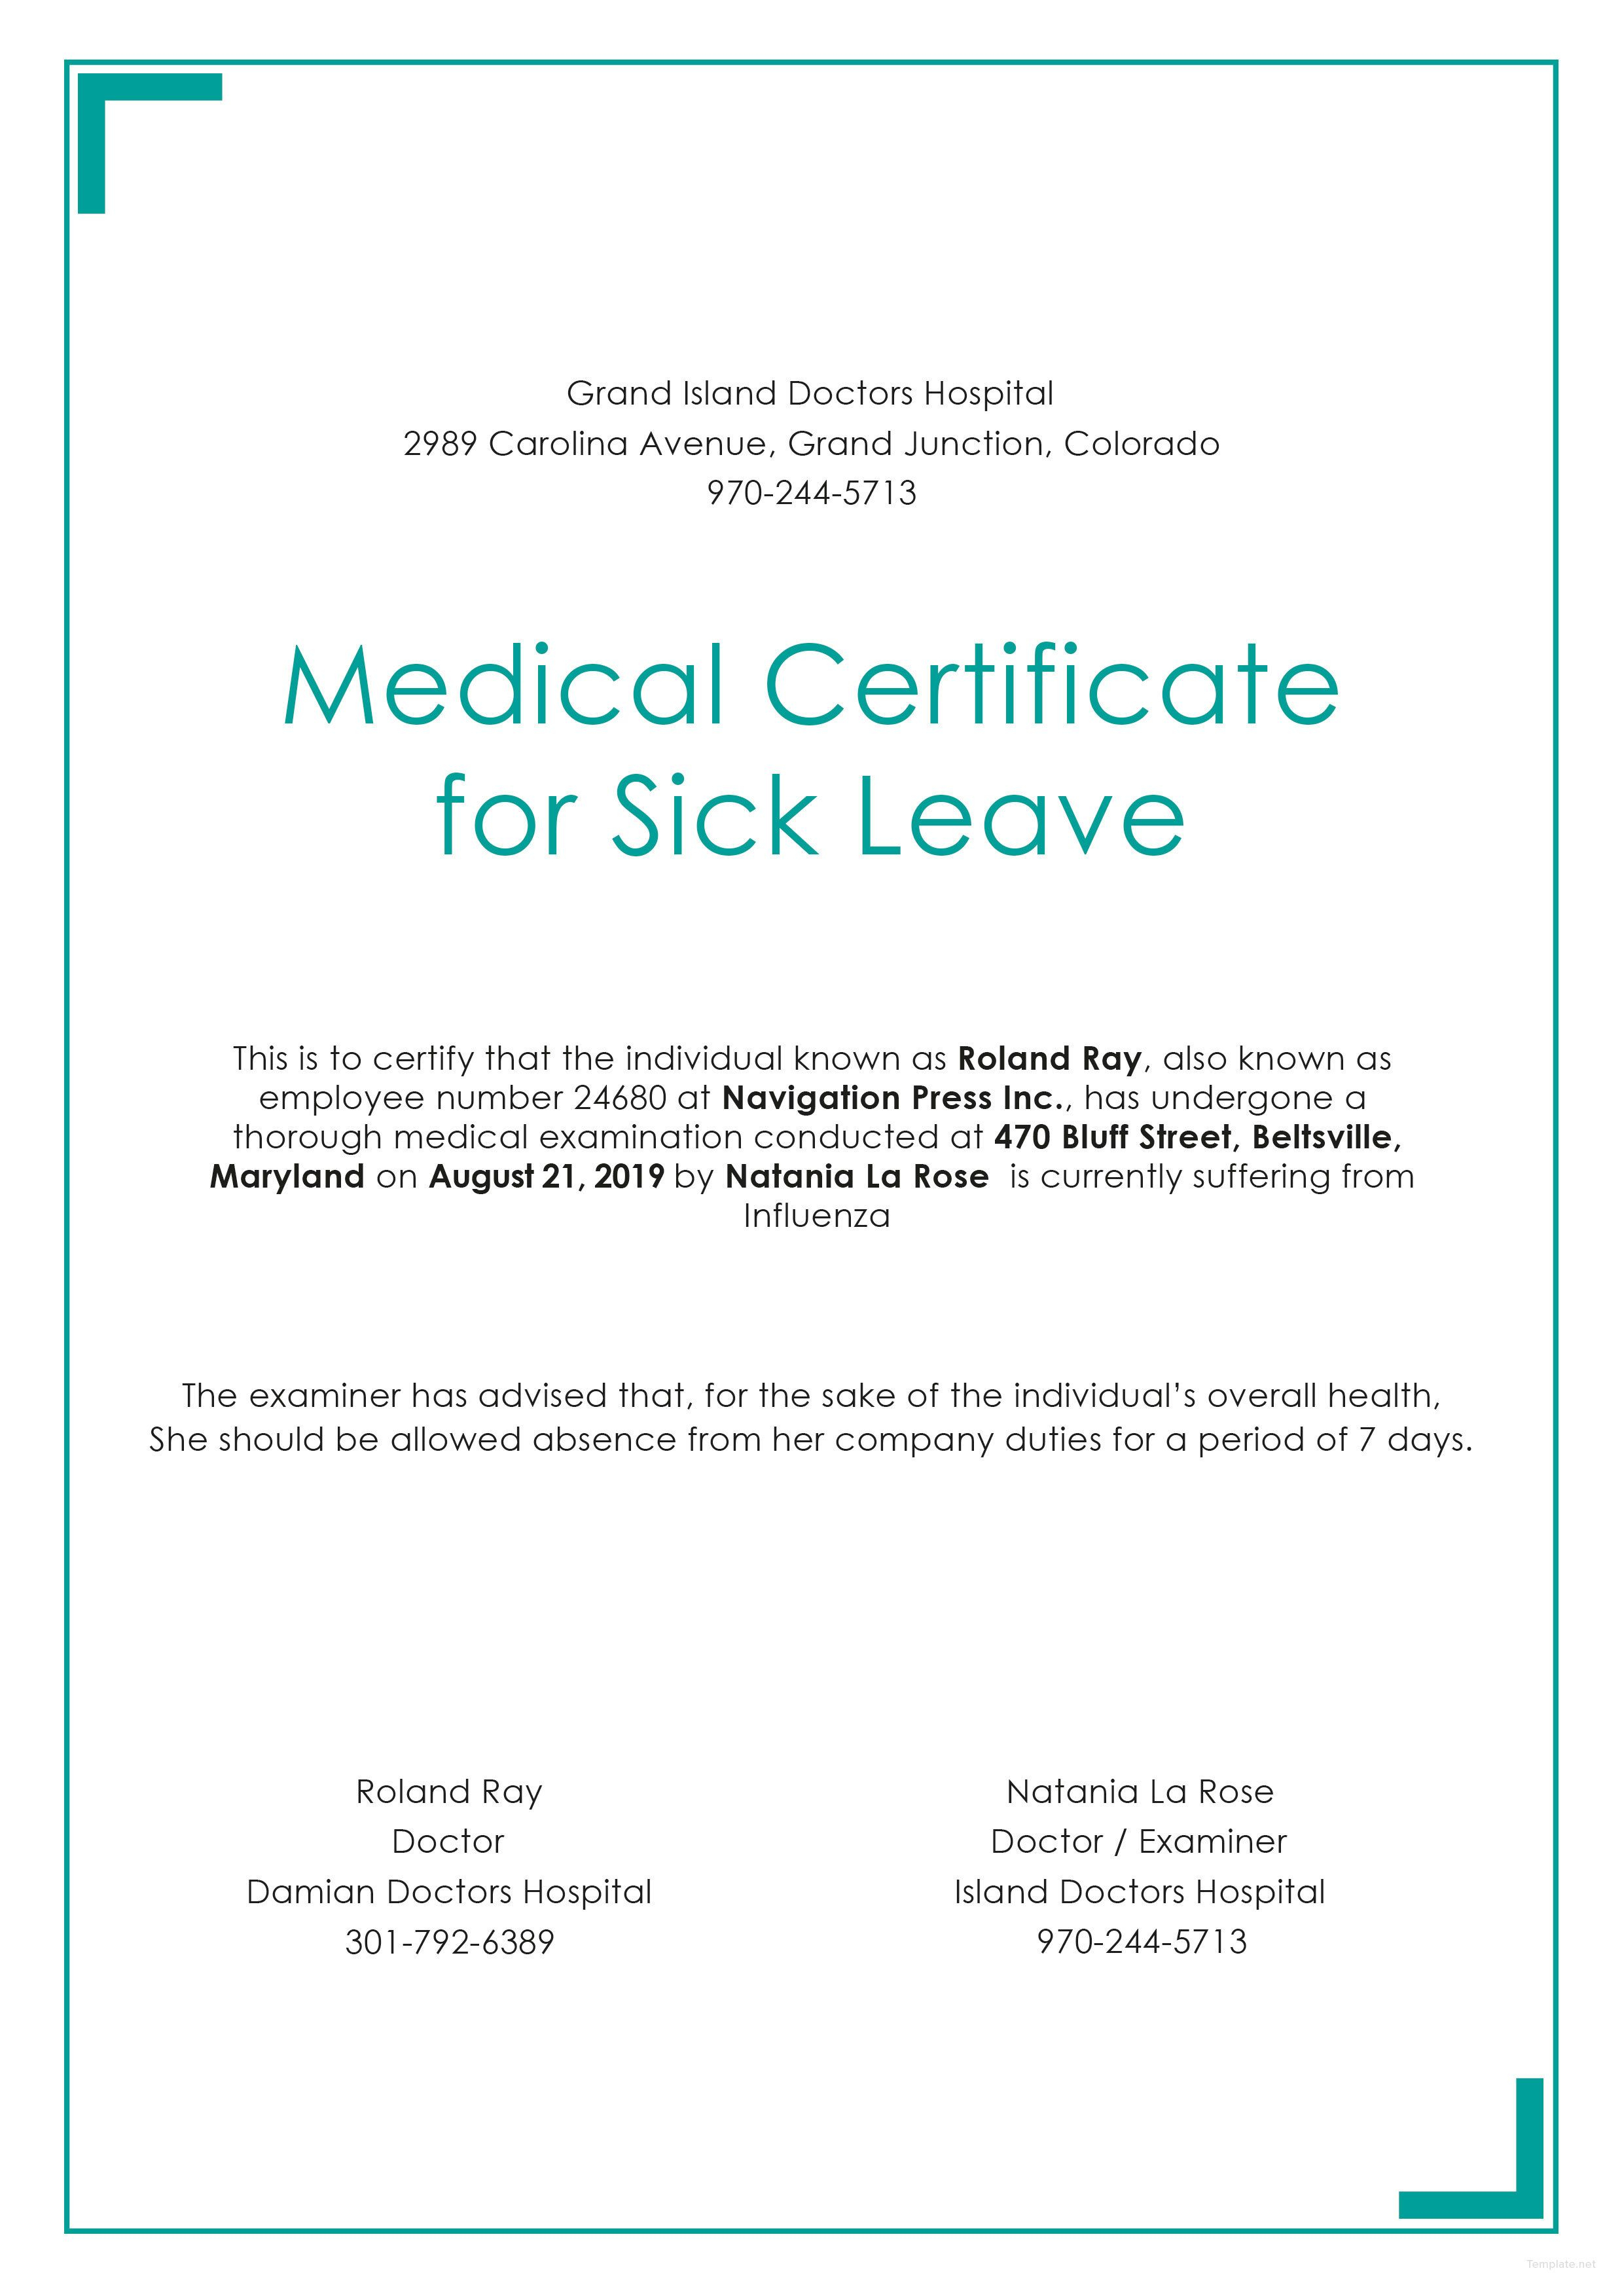 Free Medical Certificate For Sick Leave | Medical, Doctors Within Fake Medical Certificate Template Download